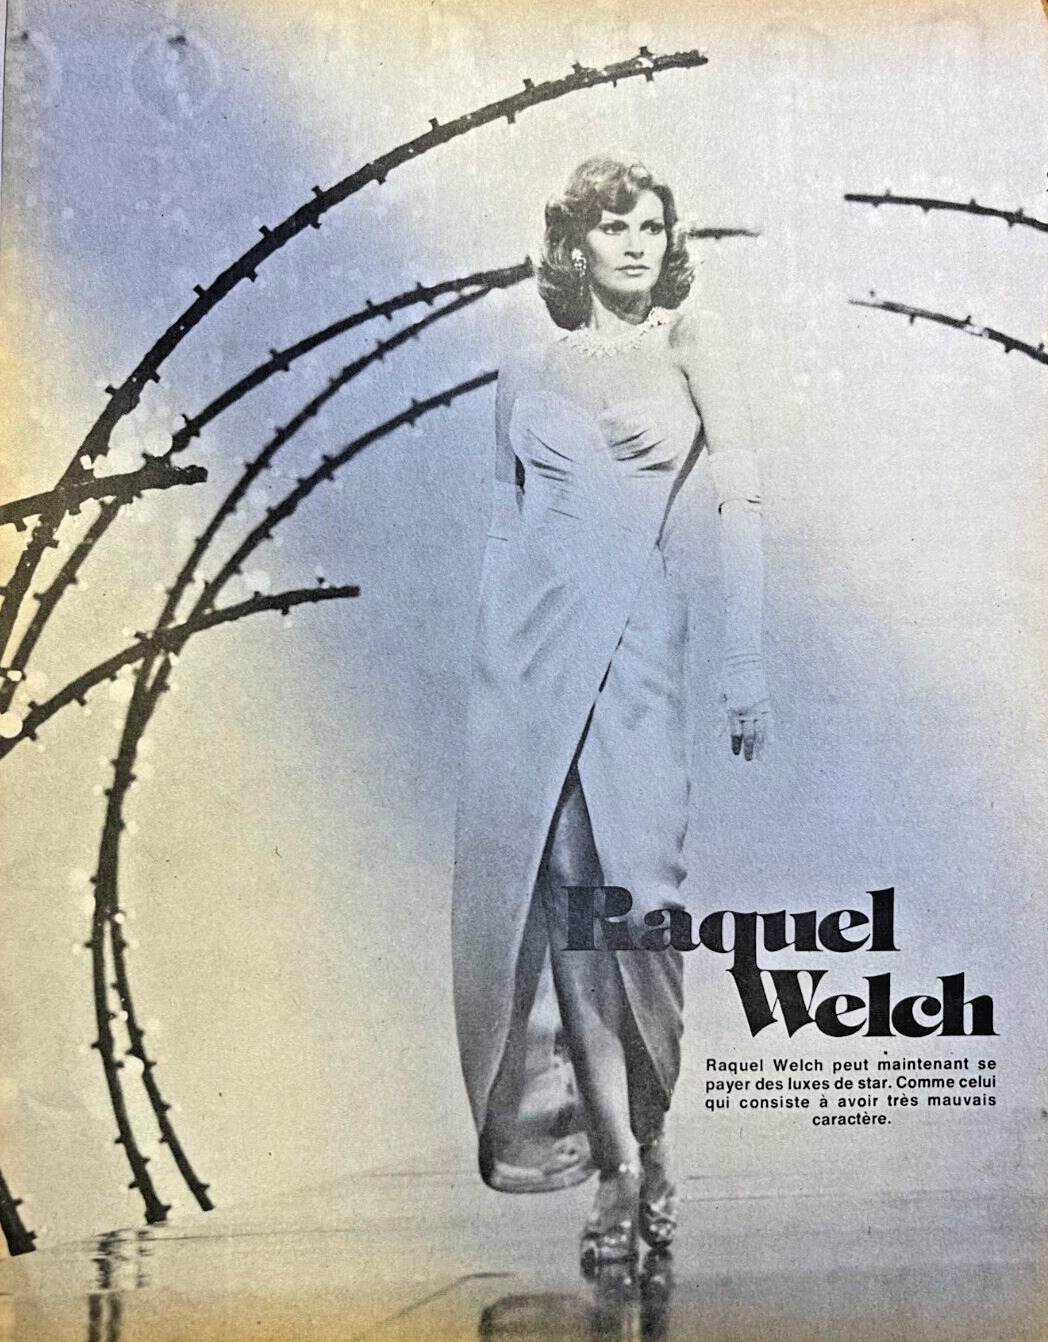 1976 Raquel Welch - French Language - illustrated